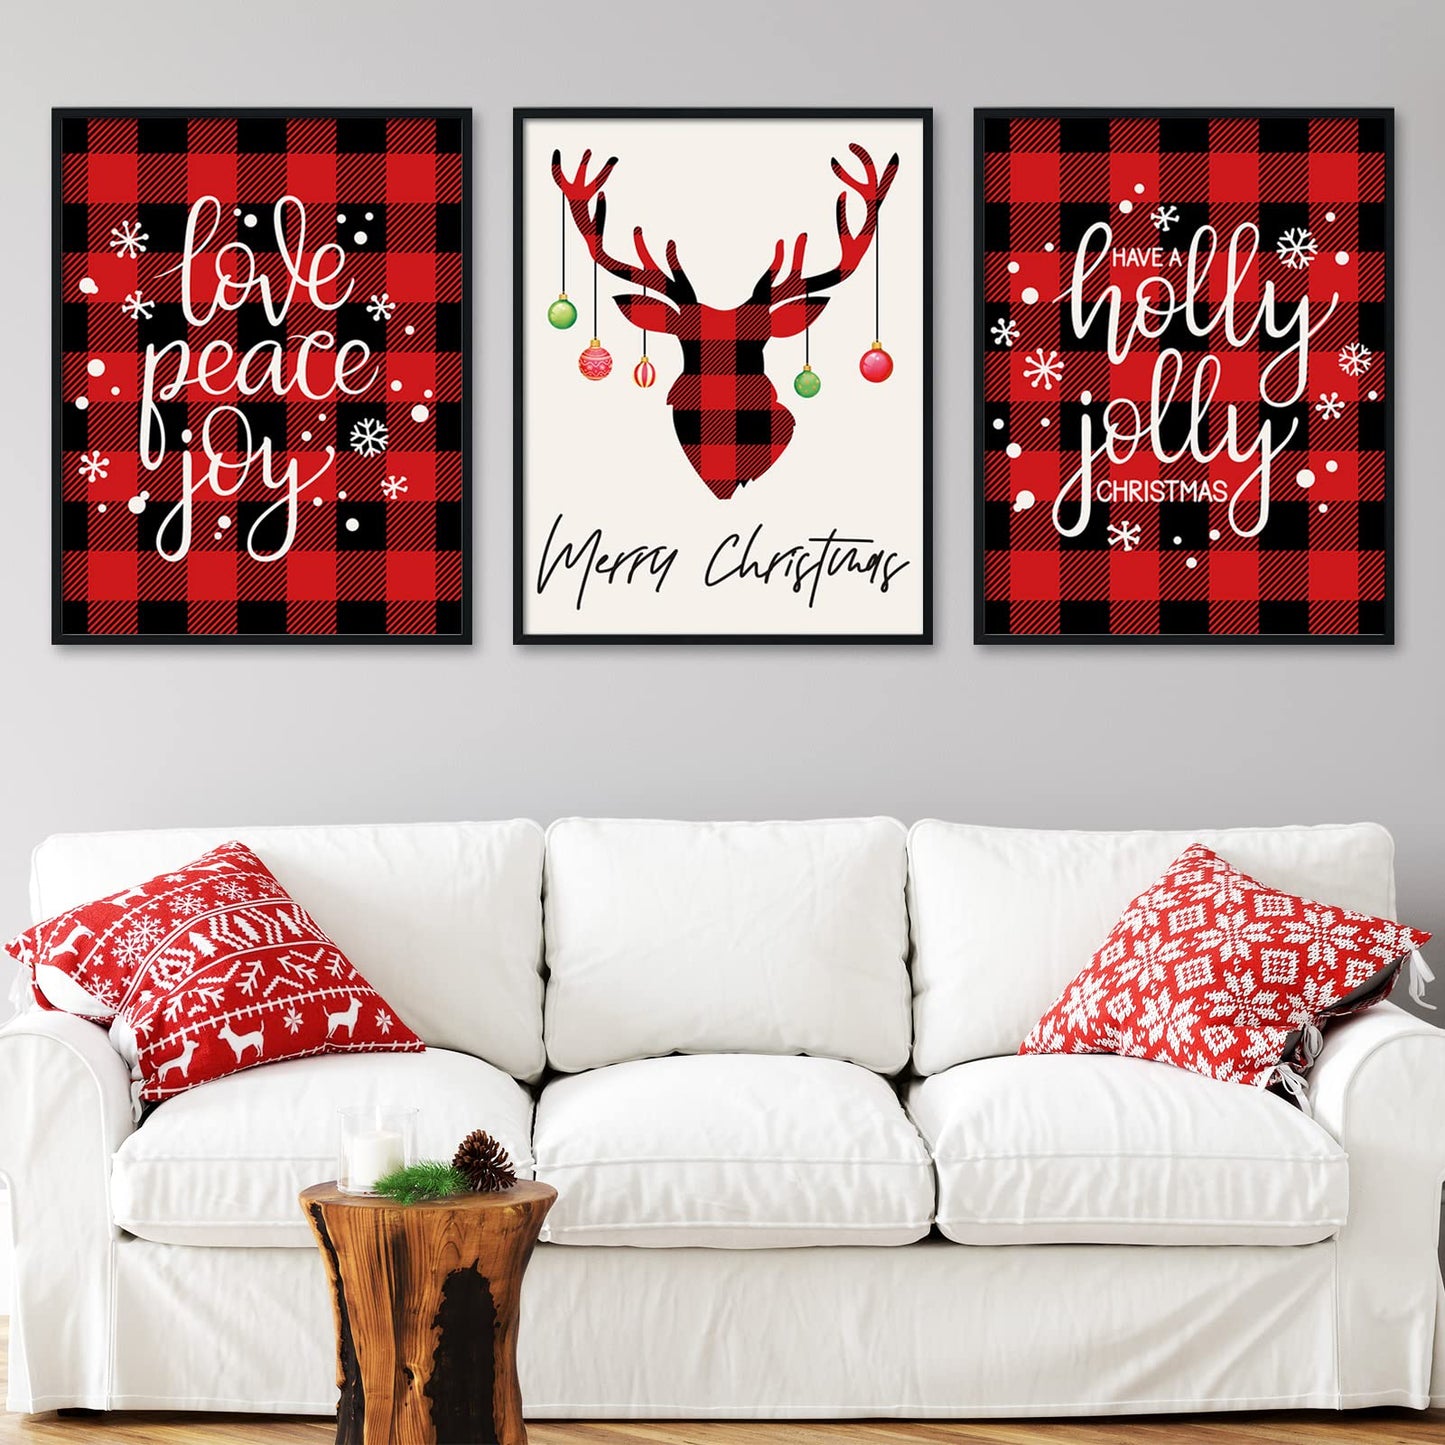 AnyDesign 6Pcs Christmas Wall Art Prints 8x10in Red Black Buffalo Plaid Art Poster Decor Farmhouse Xmas Tree Truck Reindeer Posters Room Decor for Gallery Living Room Bathroom Wall Decor(NO FRAME)